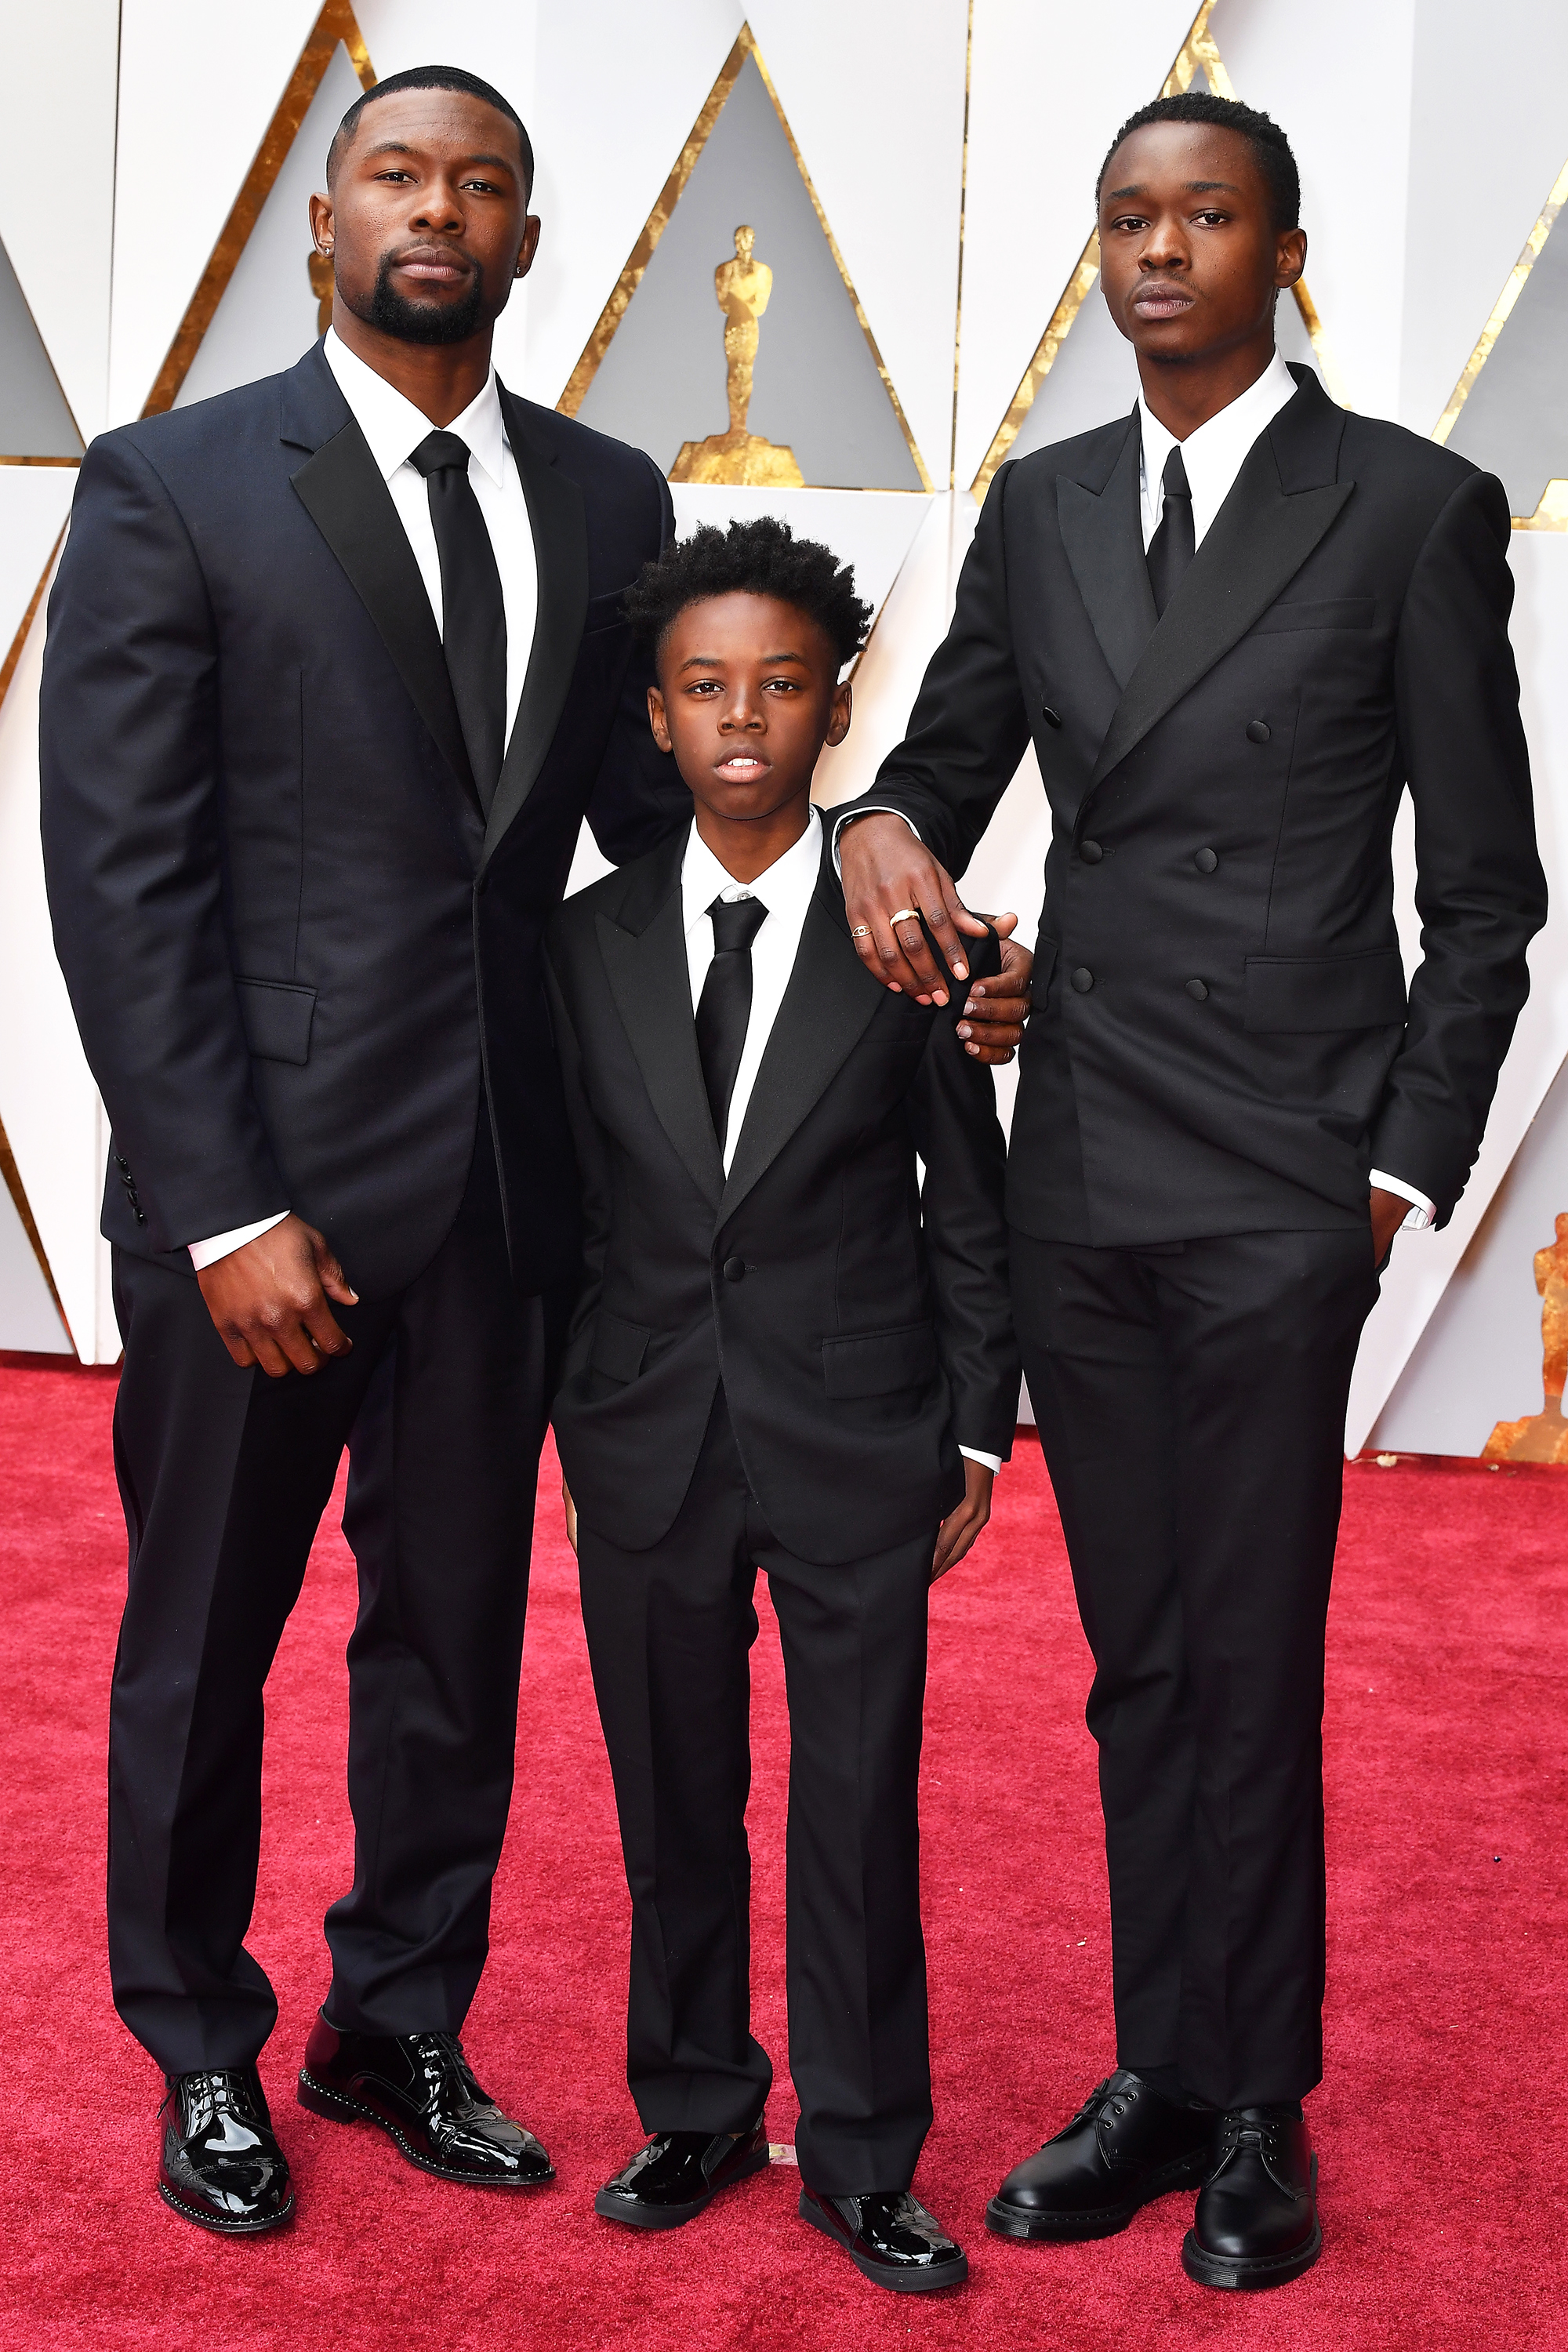 Trevante Rhodes, Alex R. Hibbert and Ashton Sanders on the red carpet for the 89th Oscars, on Feb. 26, 2017 in Hollywood, Calif.